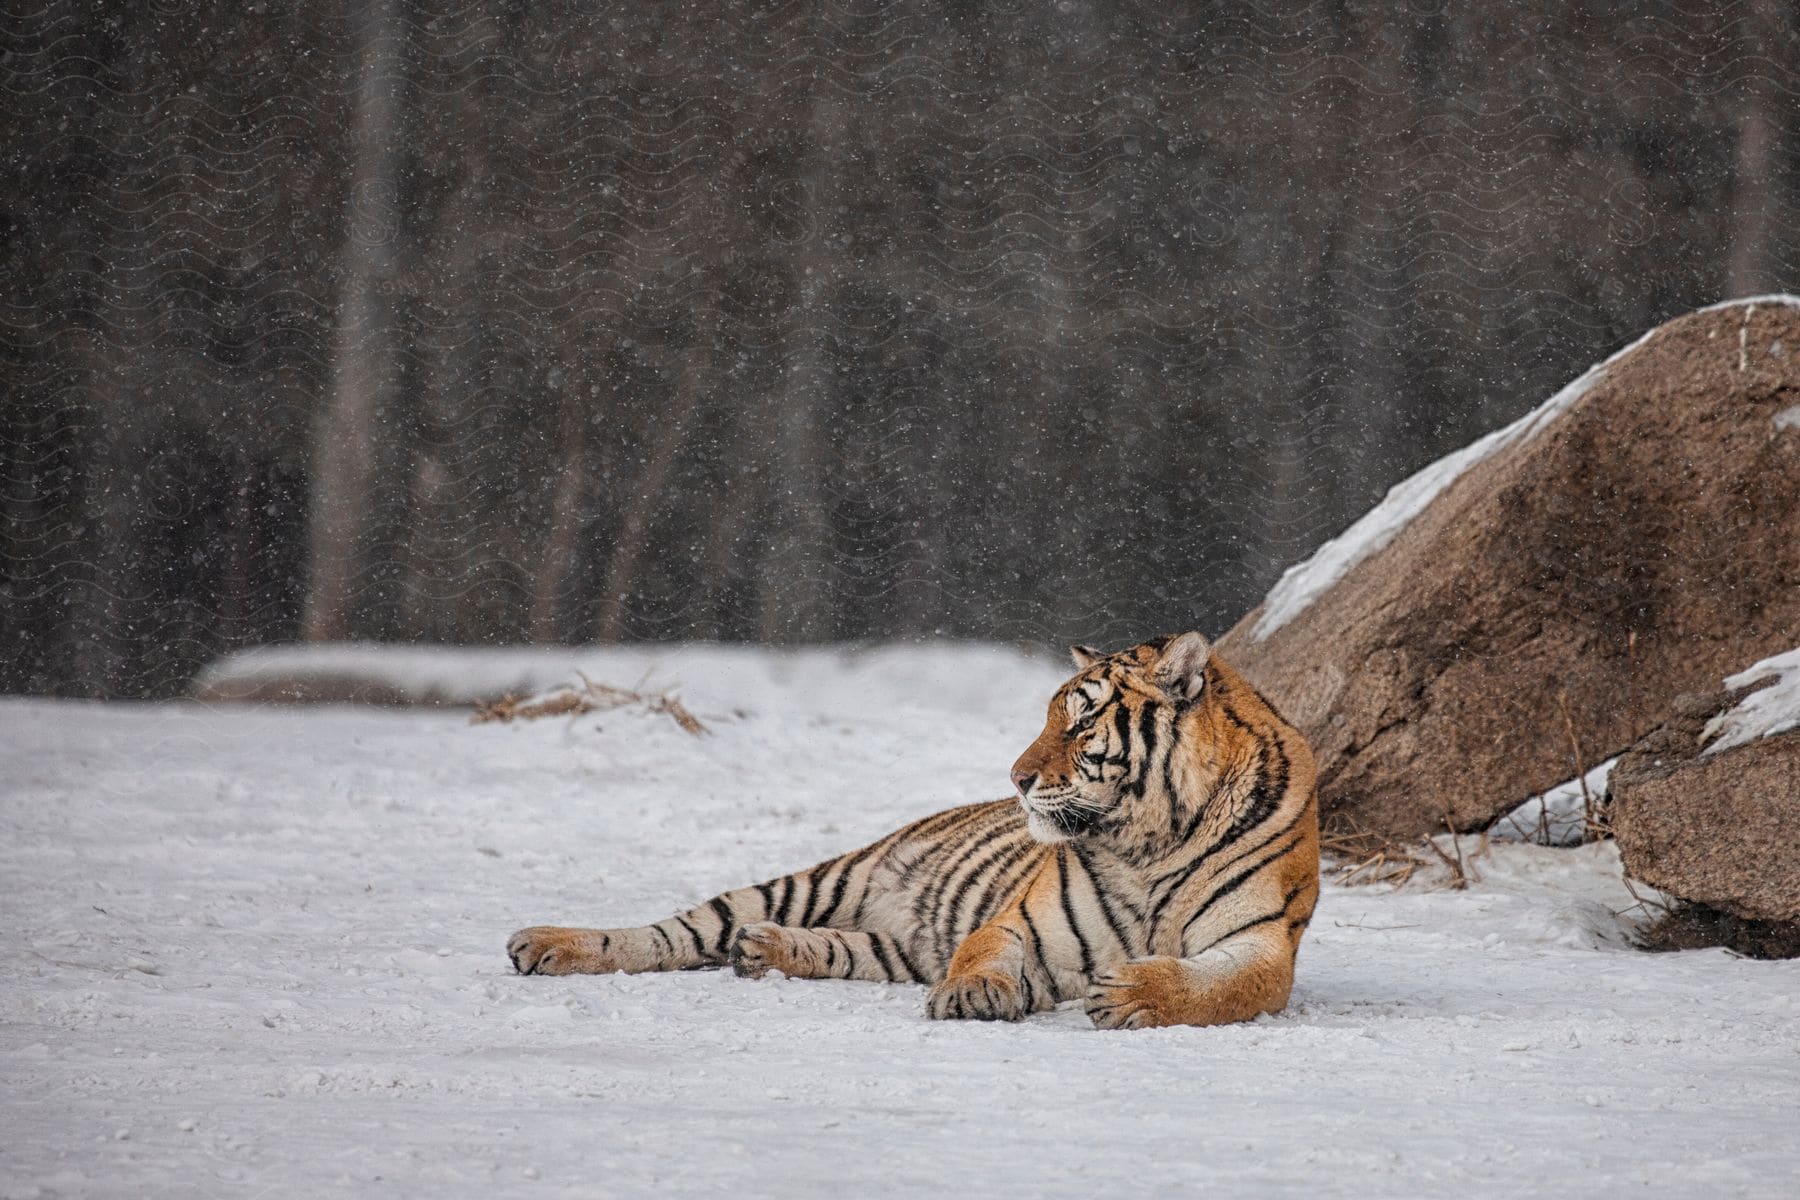 A tiger is resting outdoors in winter